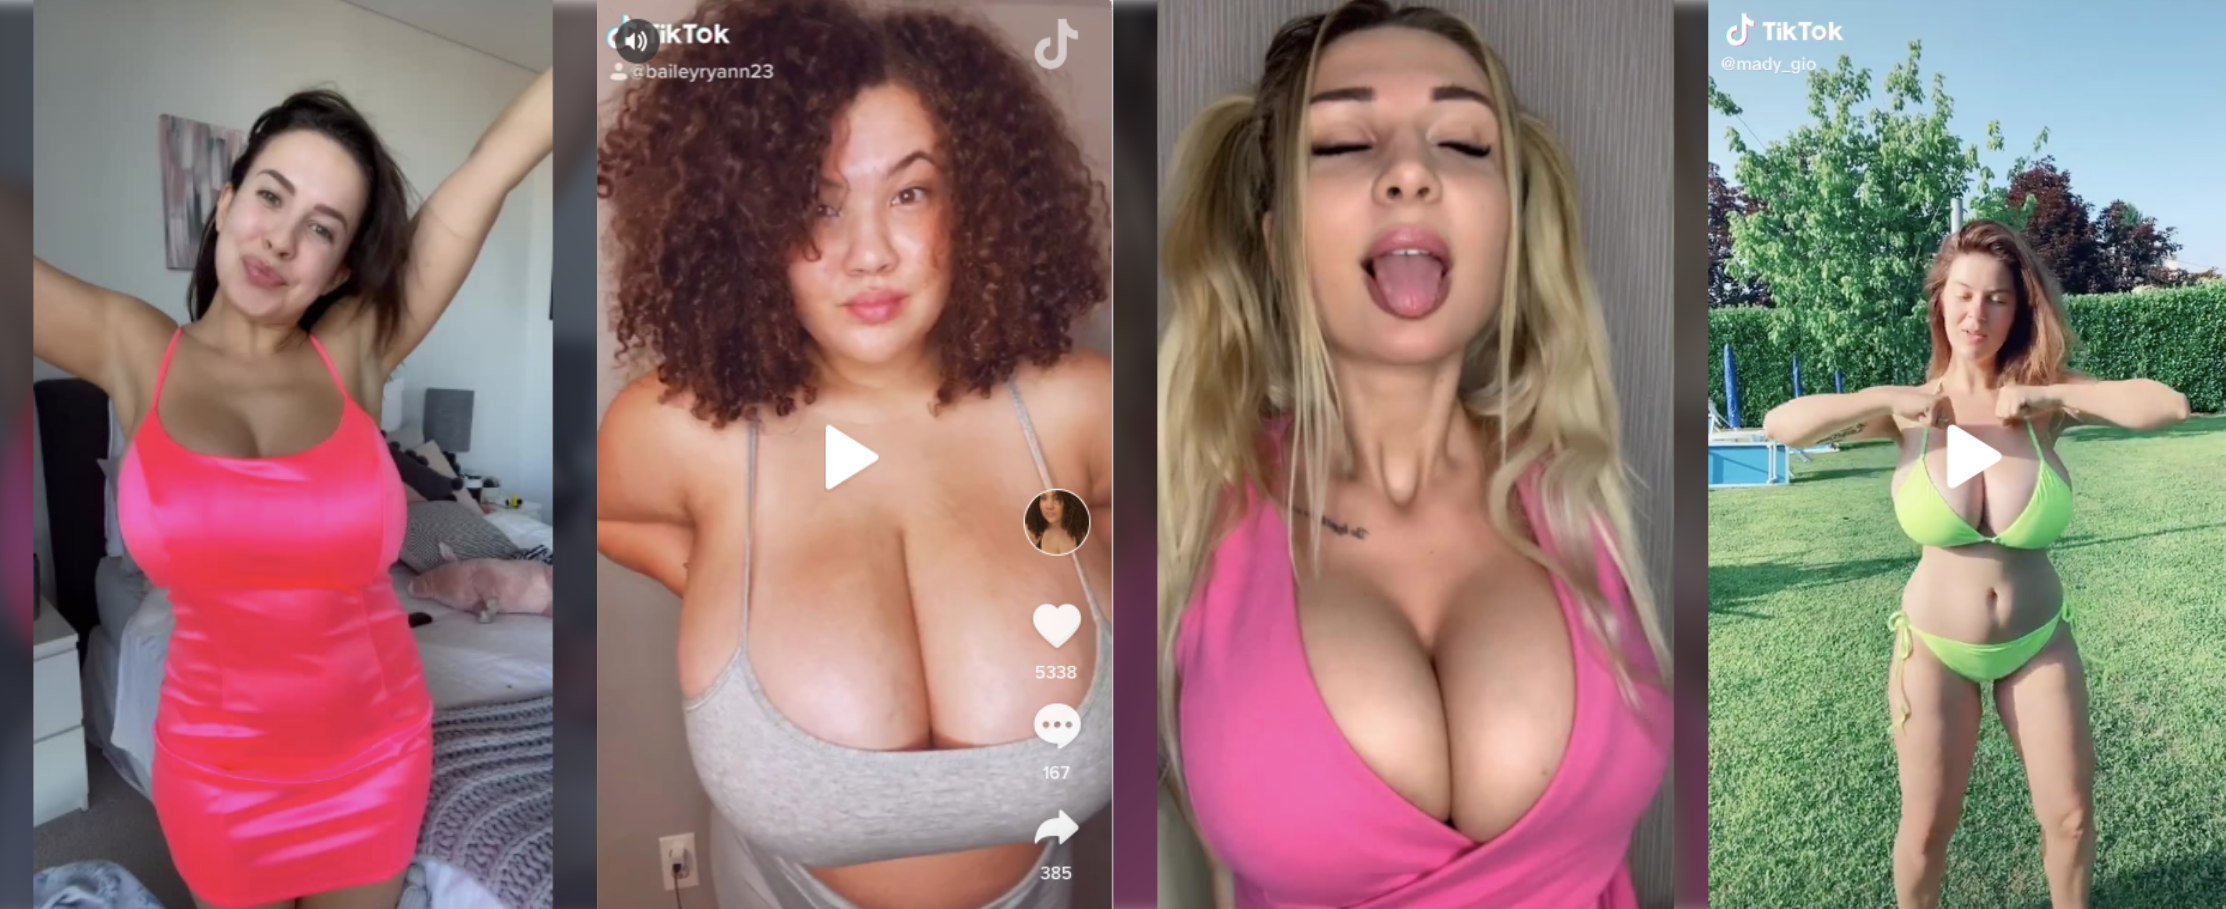 Girl boobs on big tiktok showing her this Neon Filter. 